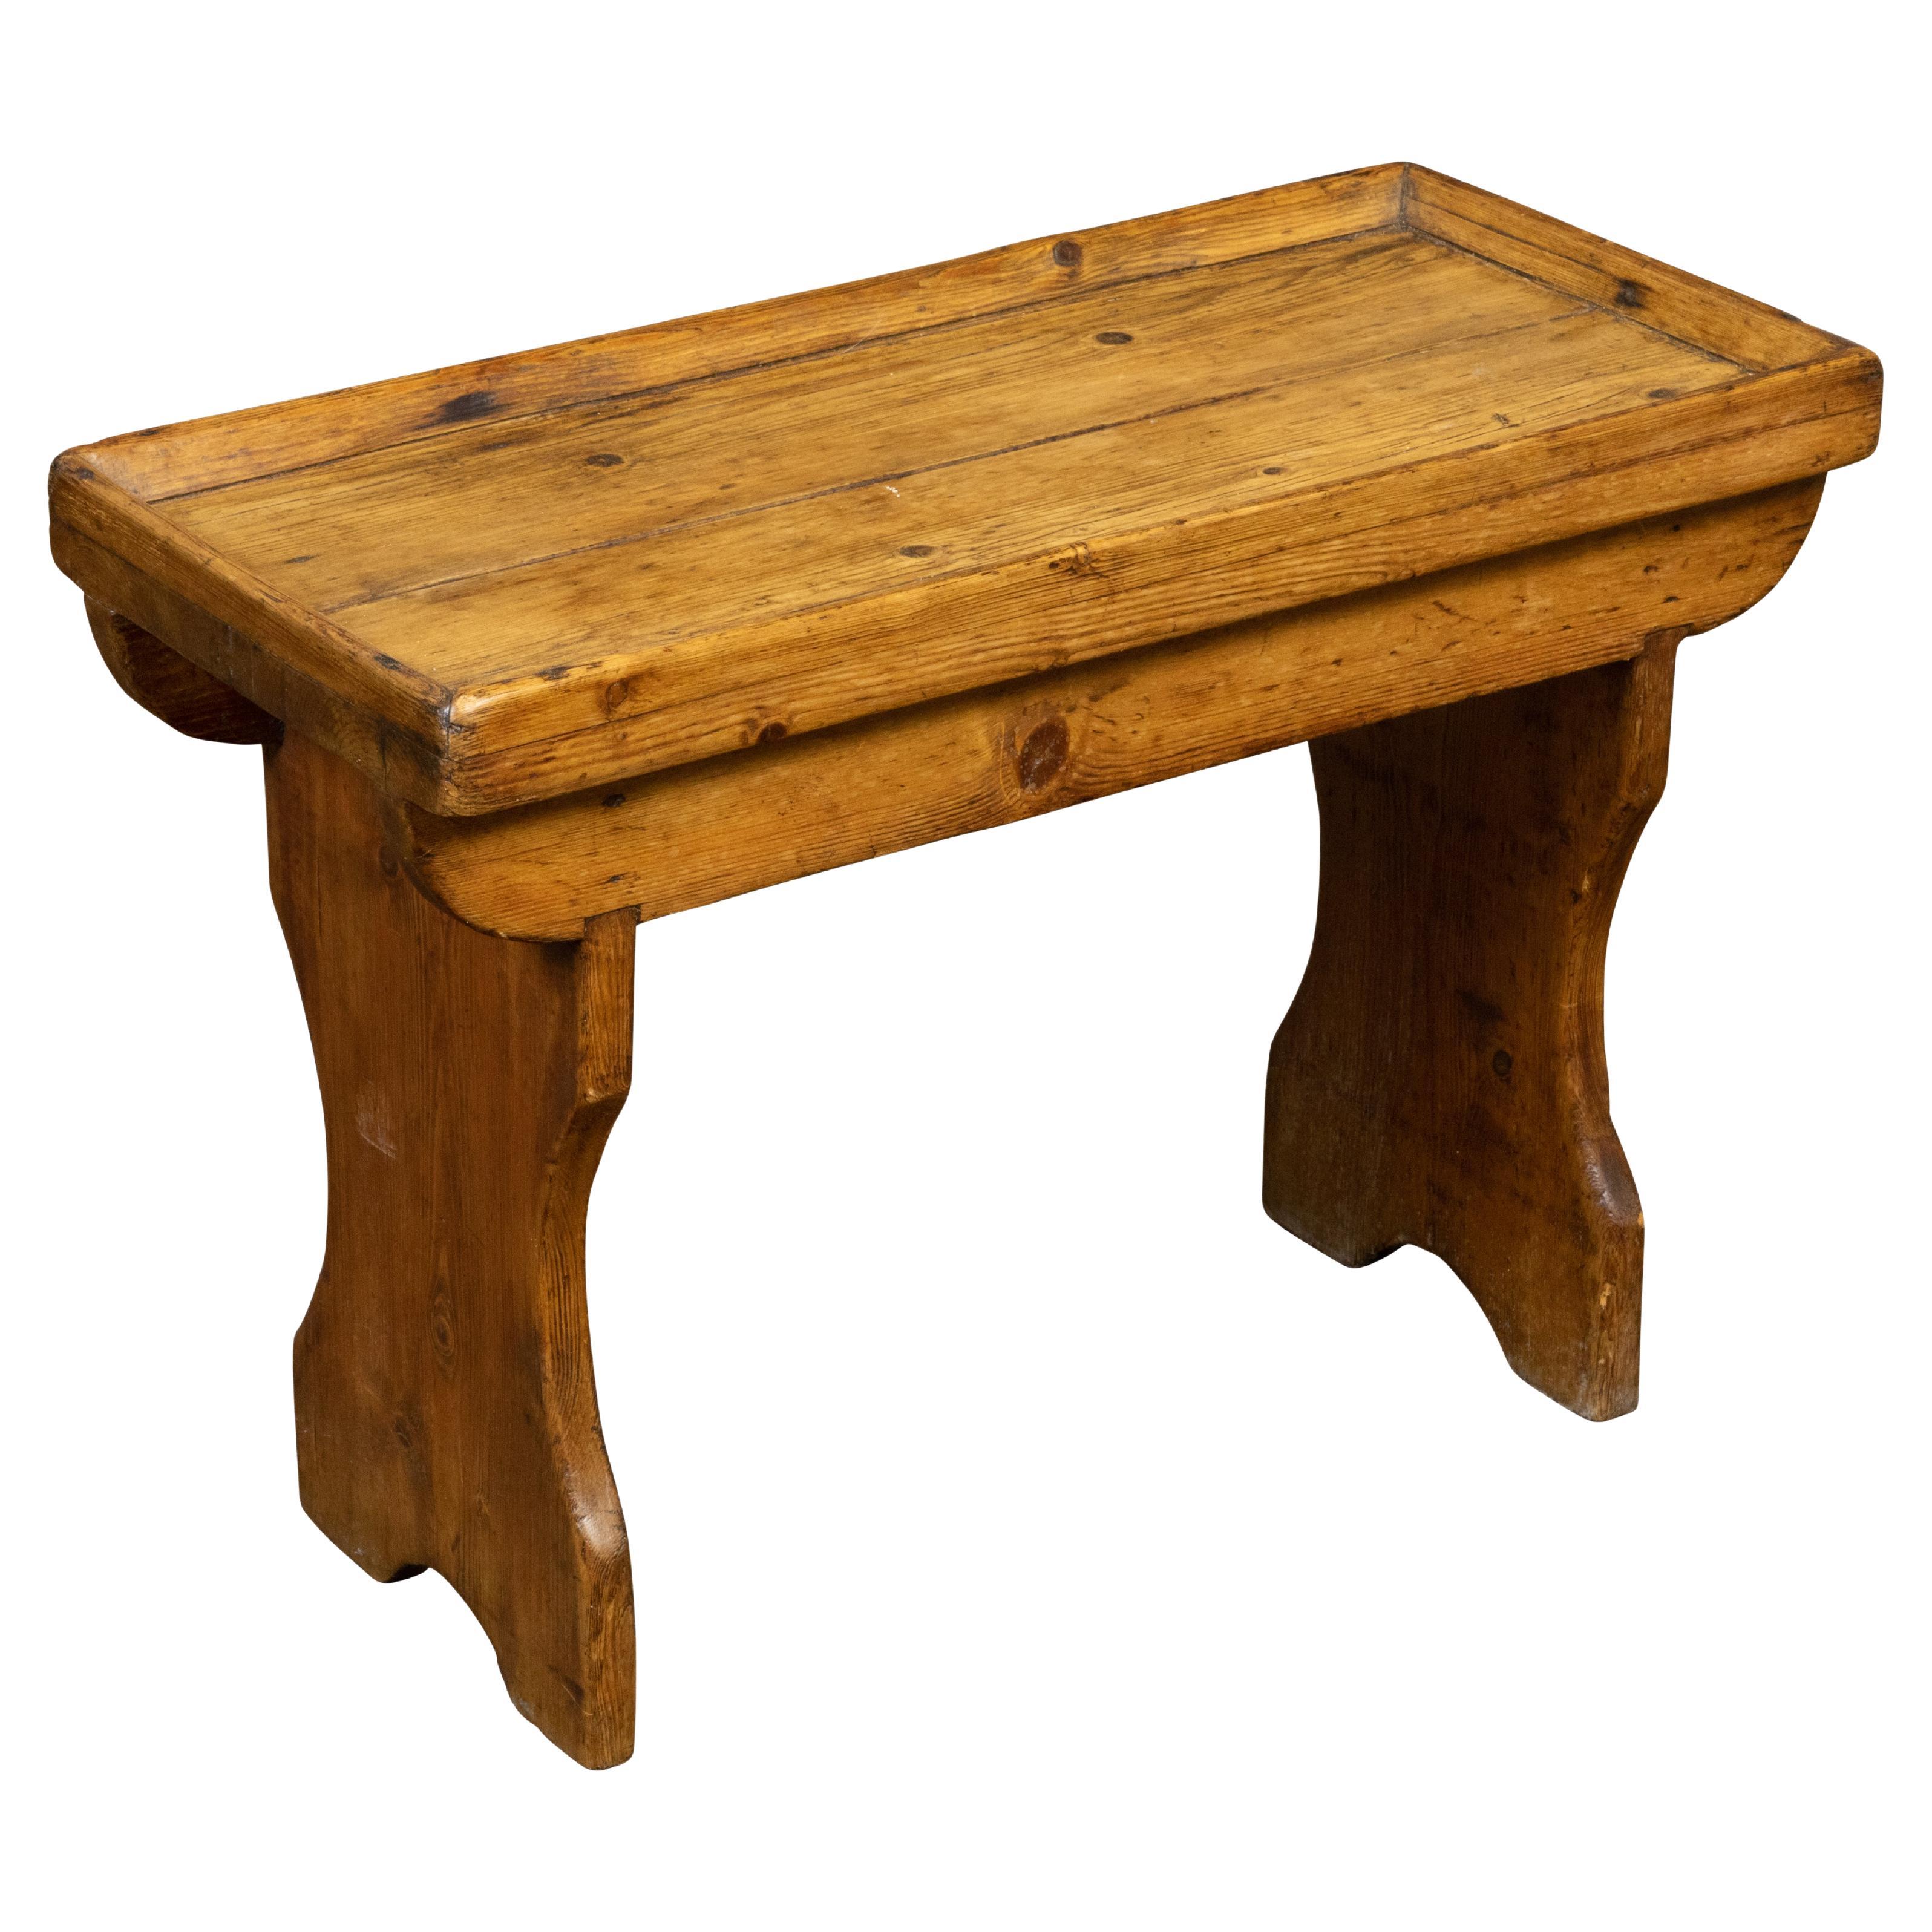 English Turn of the Century Pine Drinks Table with Tray Top and Carved Legs